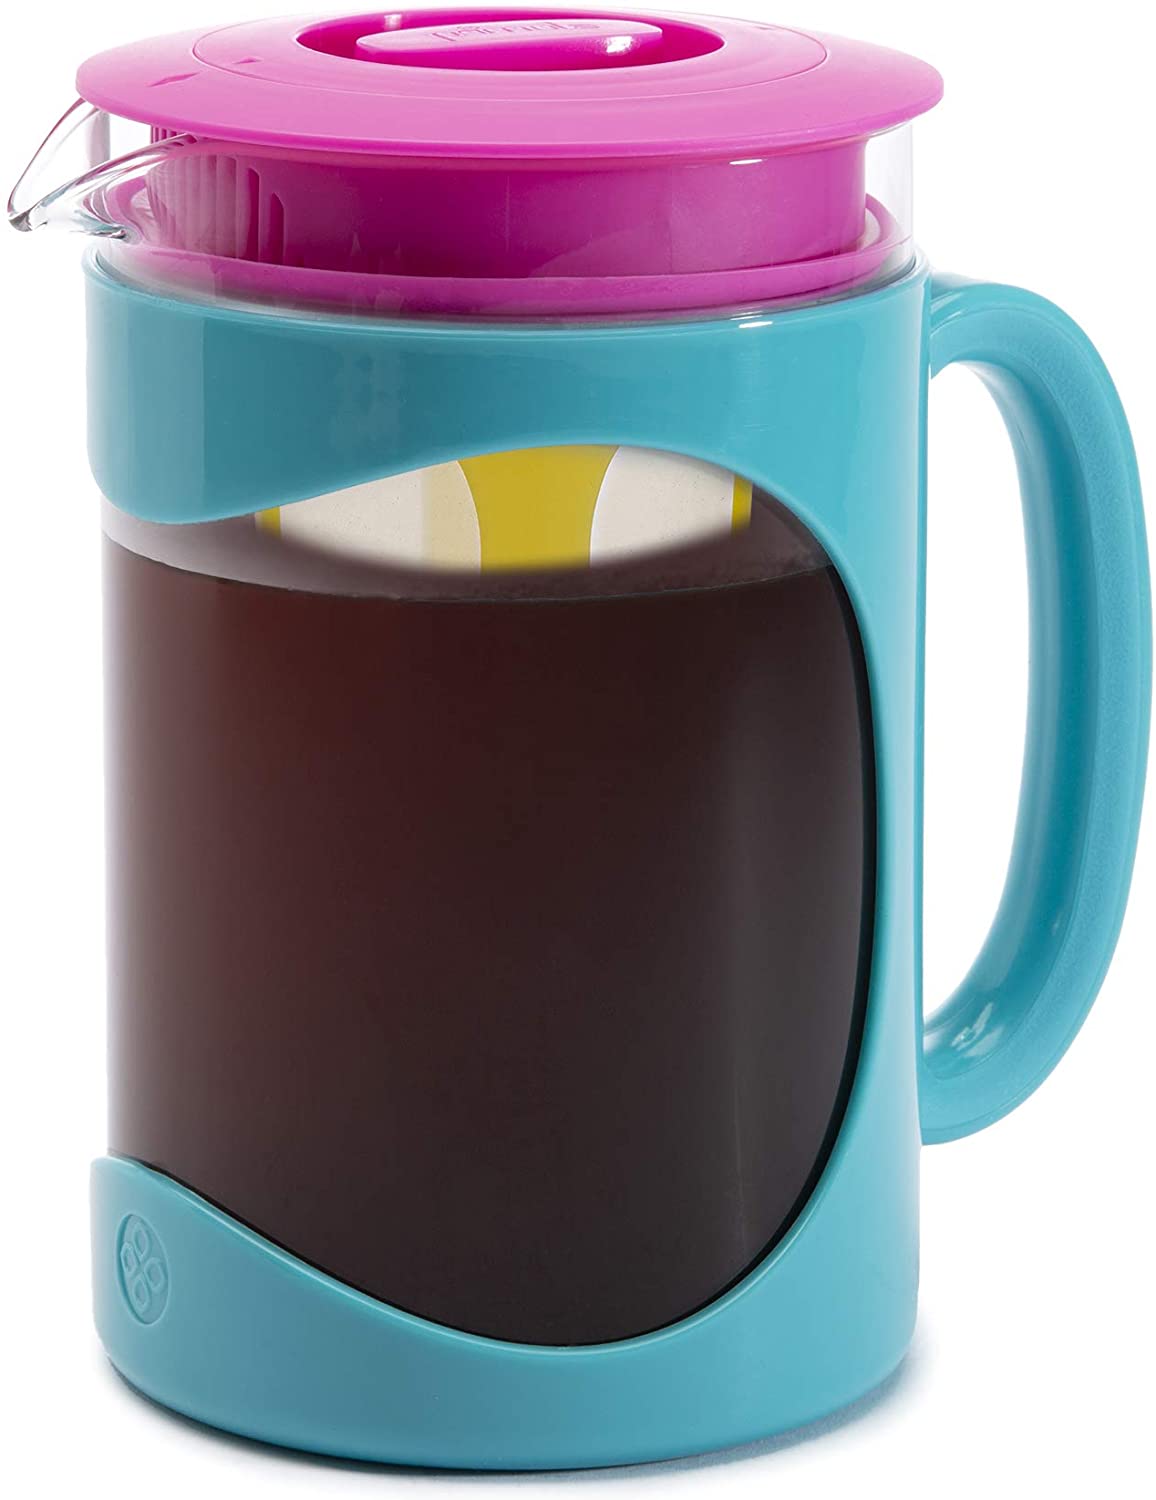 https://www.wideopencountry.com/wp-content/uploads/sites/4/eats/2021/03/Primula-Burke-Throwback-Deluxe-Cold-Brew-Iced-Coffee-Maker-Comfort-Grip-Handle-Durable-Glass-Carafe-Removable-Mesh-Filter-Perfect-6-Cup-Size-1.6-Qt-Multicolor-.jpg?resize=1156%2C1500